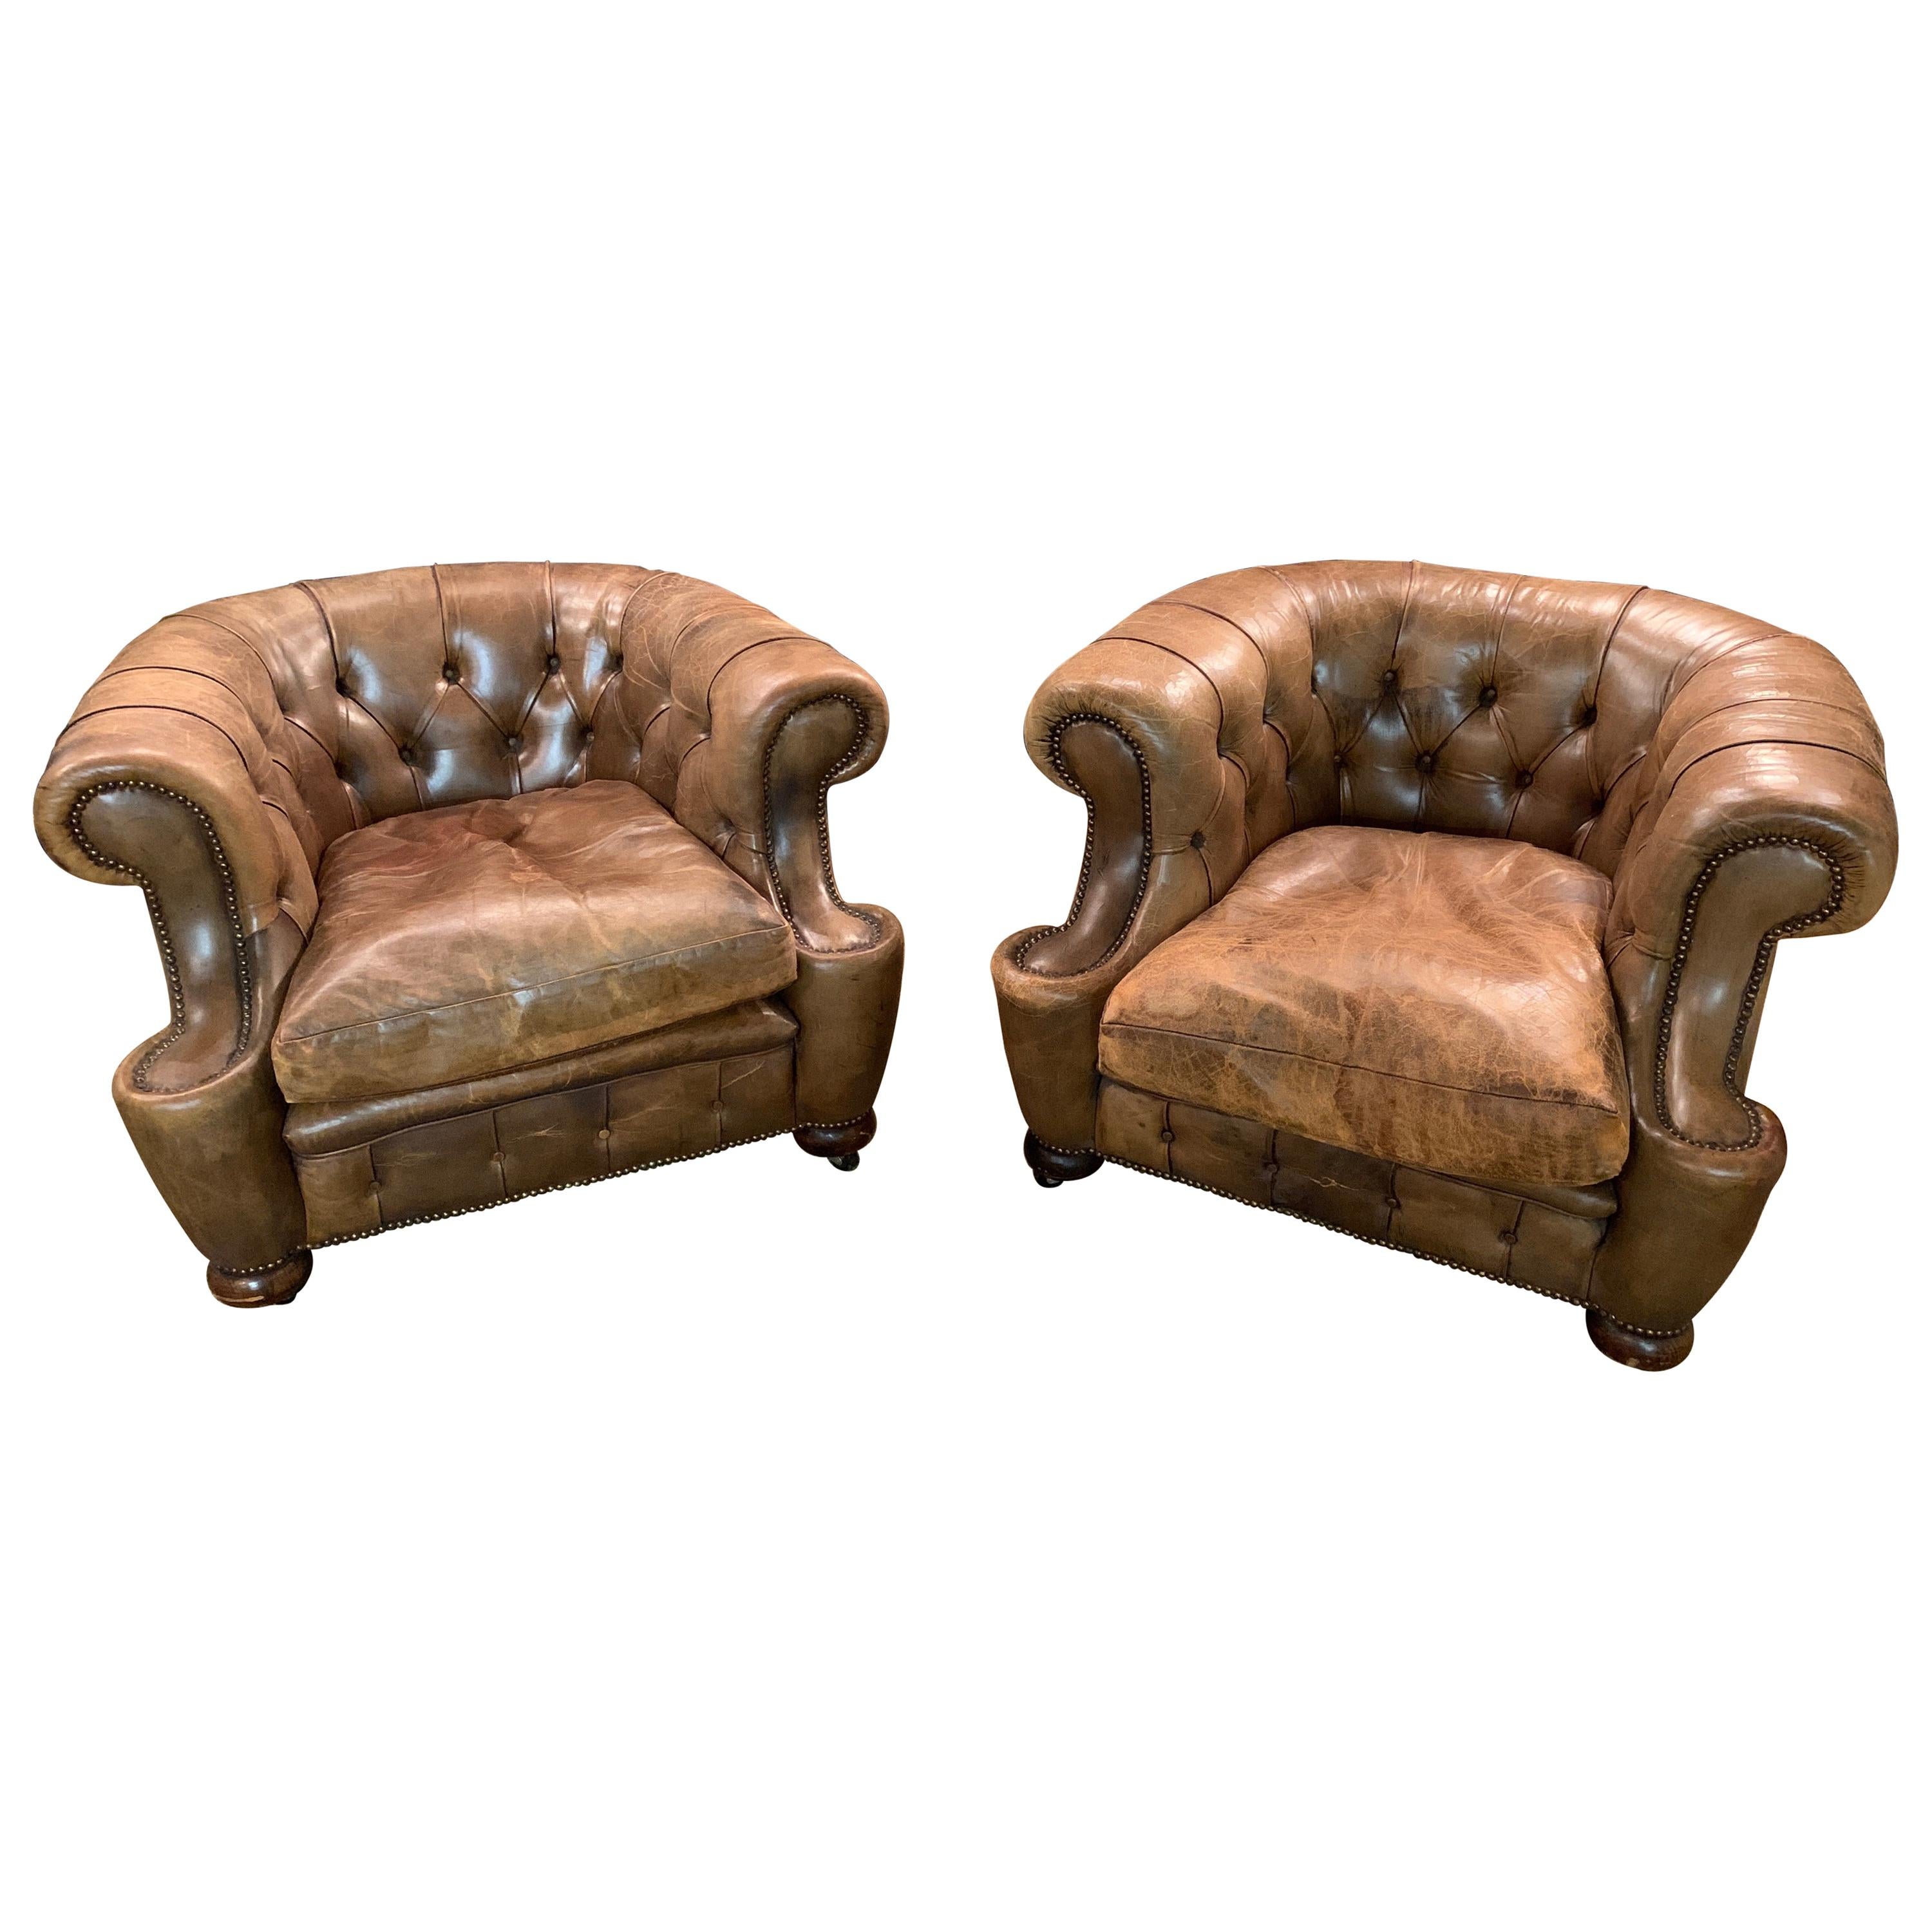 Rare Pair of Antique Vintage Chesterfield Armchairs with Horsehair in Brown